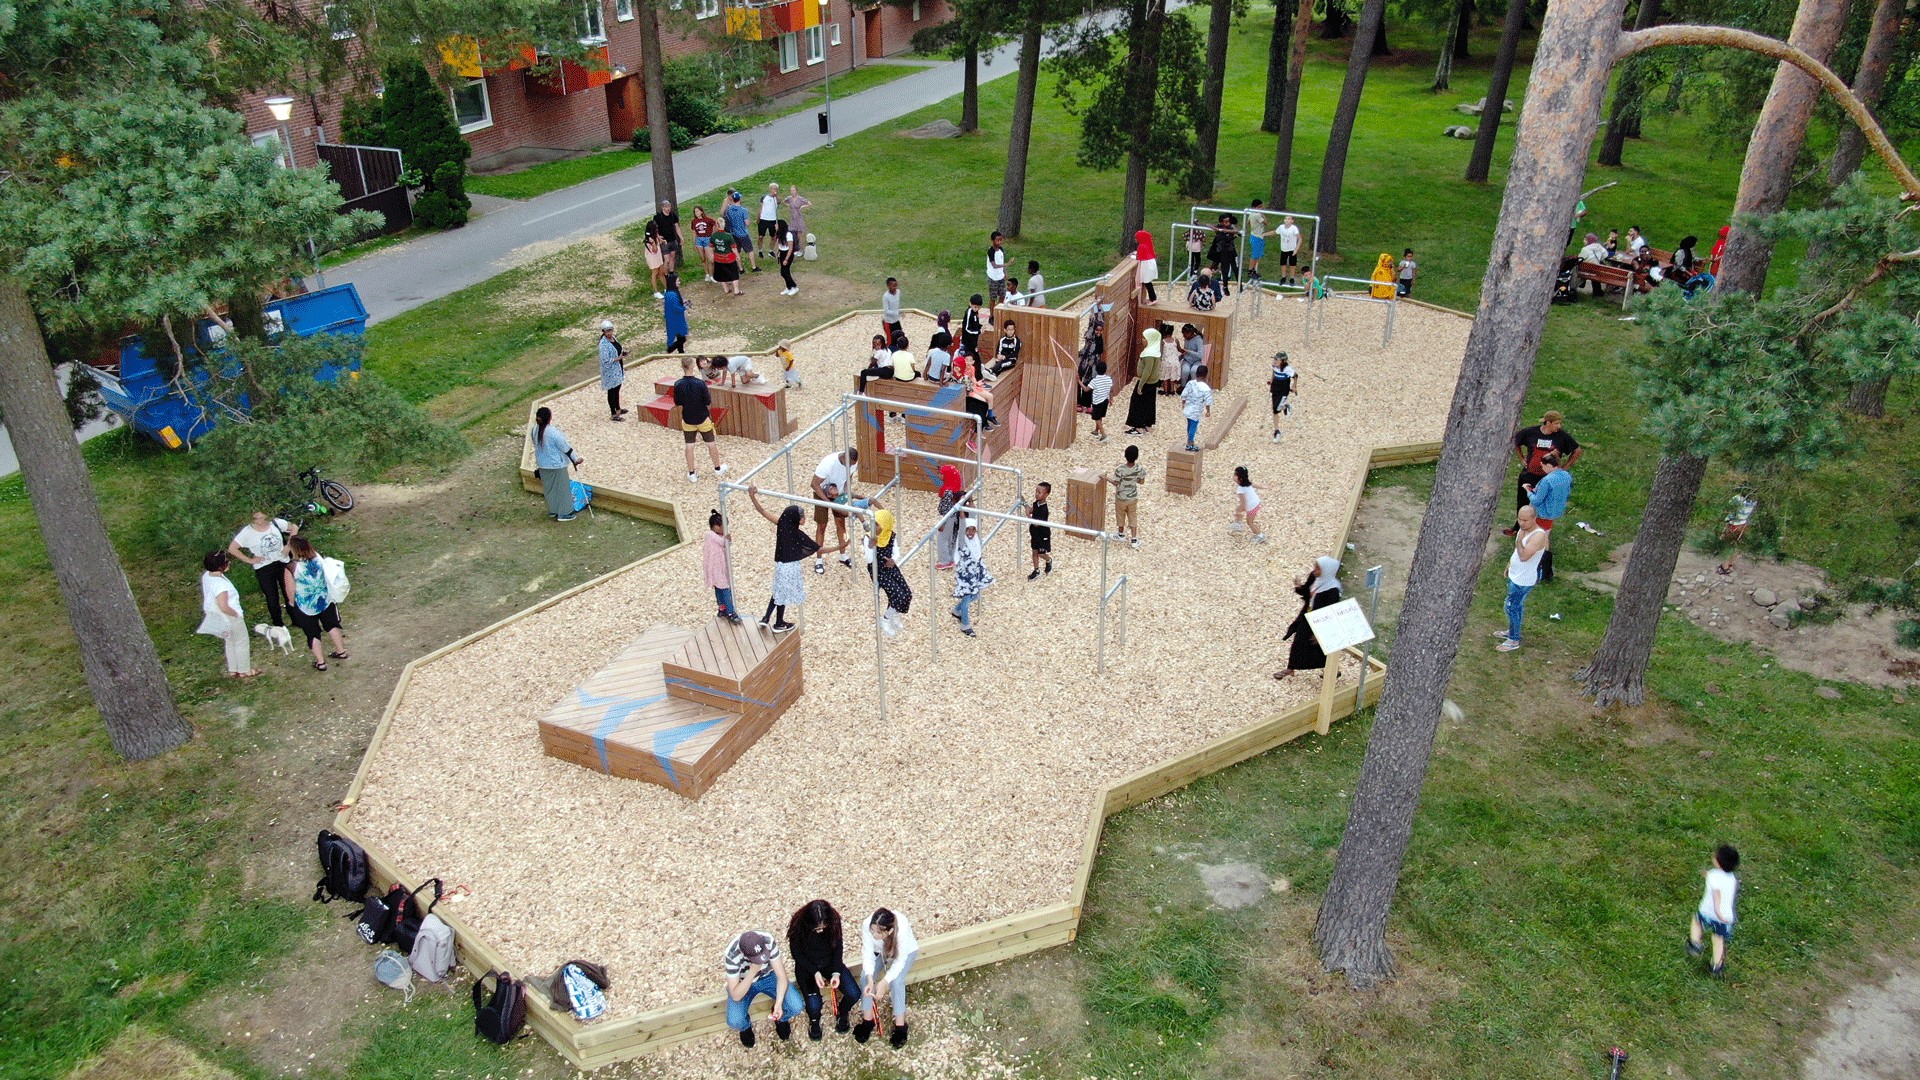 View of a playground with playing children